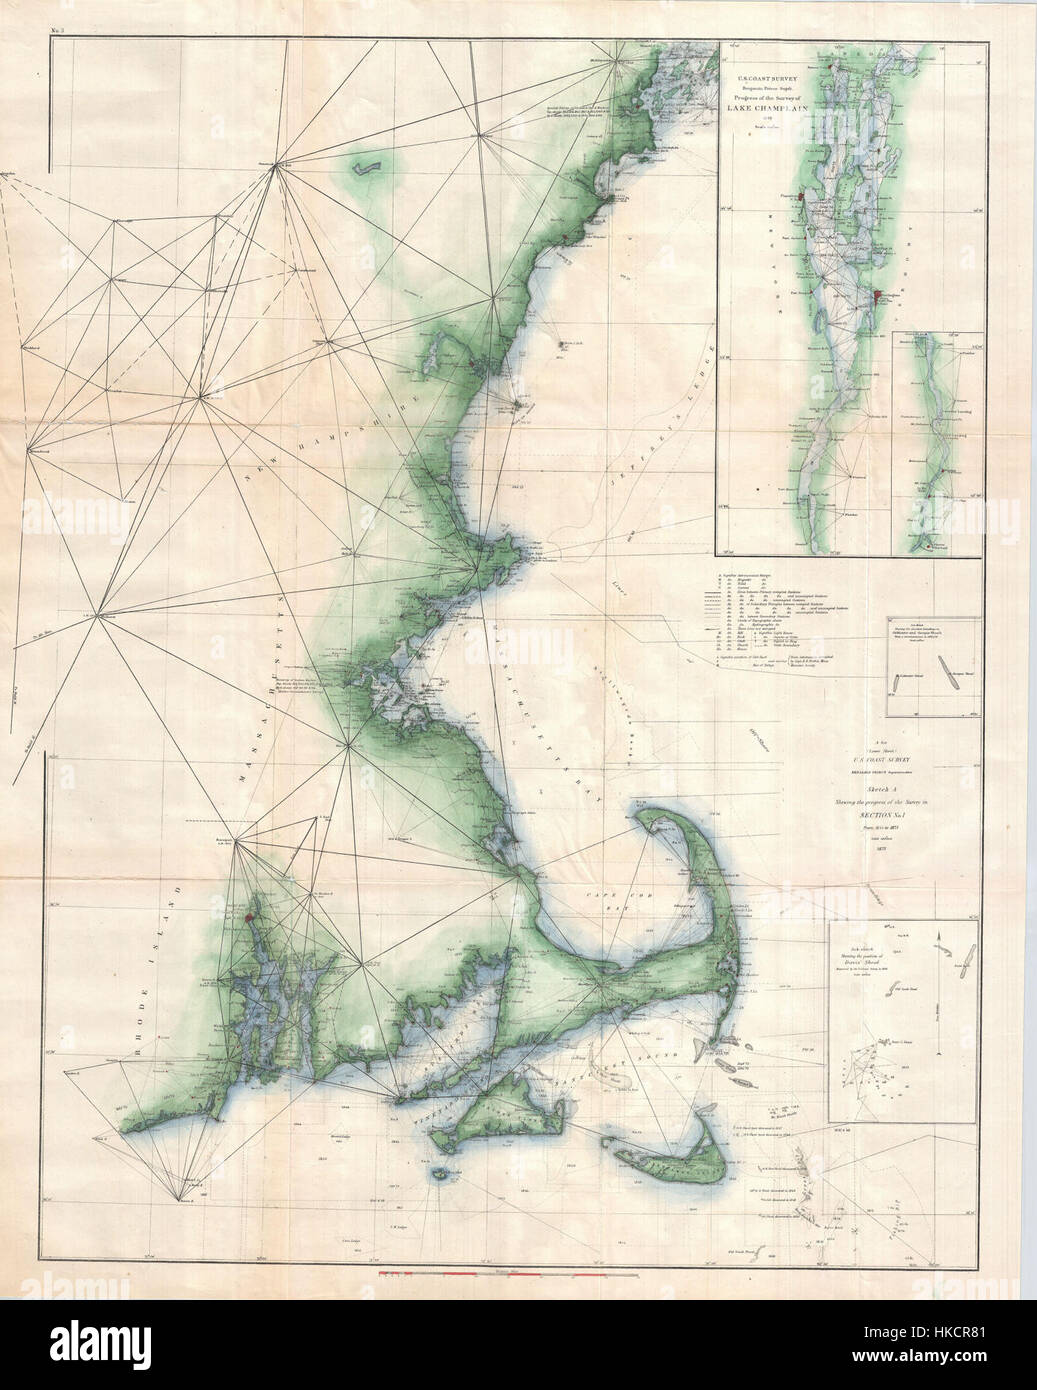 1873 U.S. Coast Survey Chart of Map of Cape Cod, Nantucket, Marthas Vineyard, and Cape Ann   Geographicus   CapeCod uscs 1873 Stock Photo